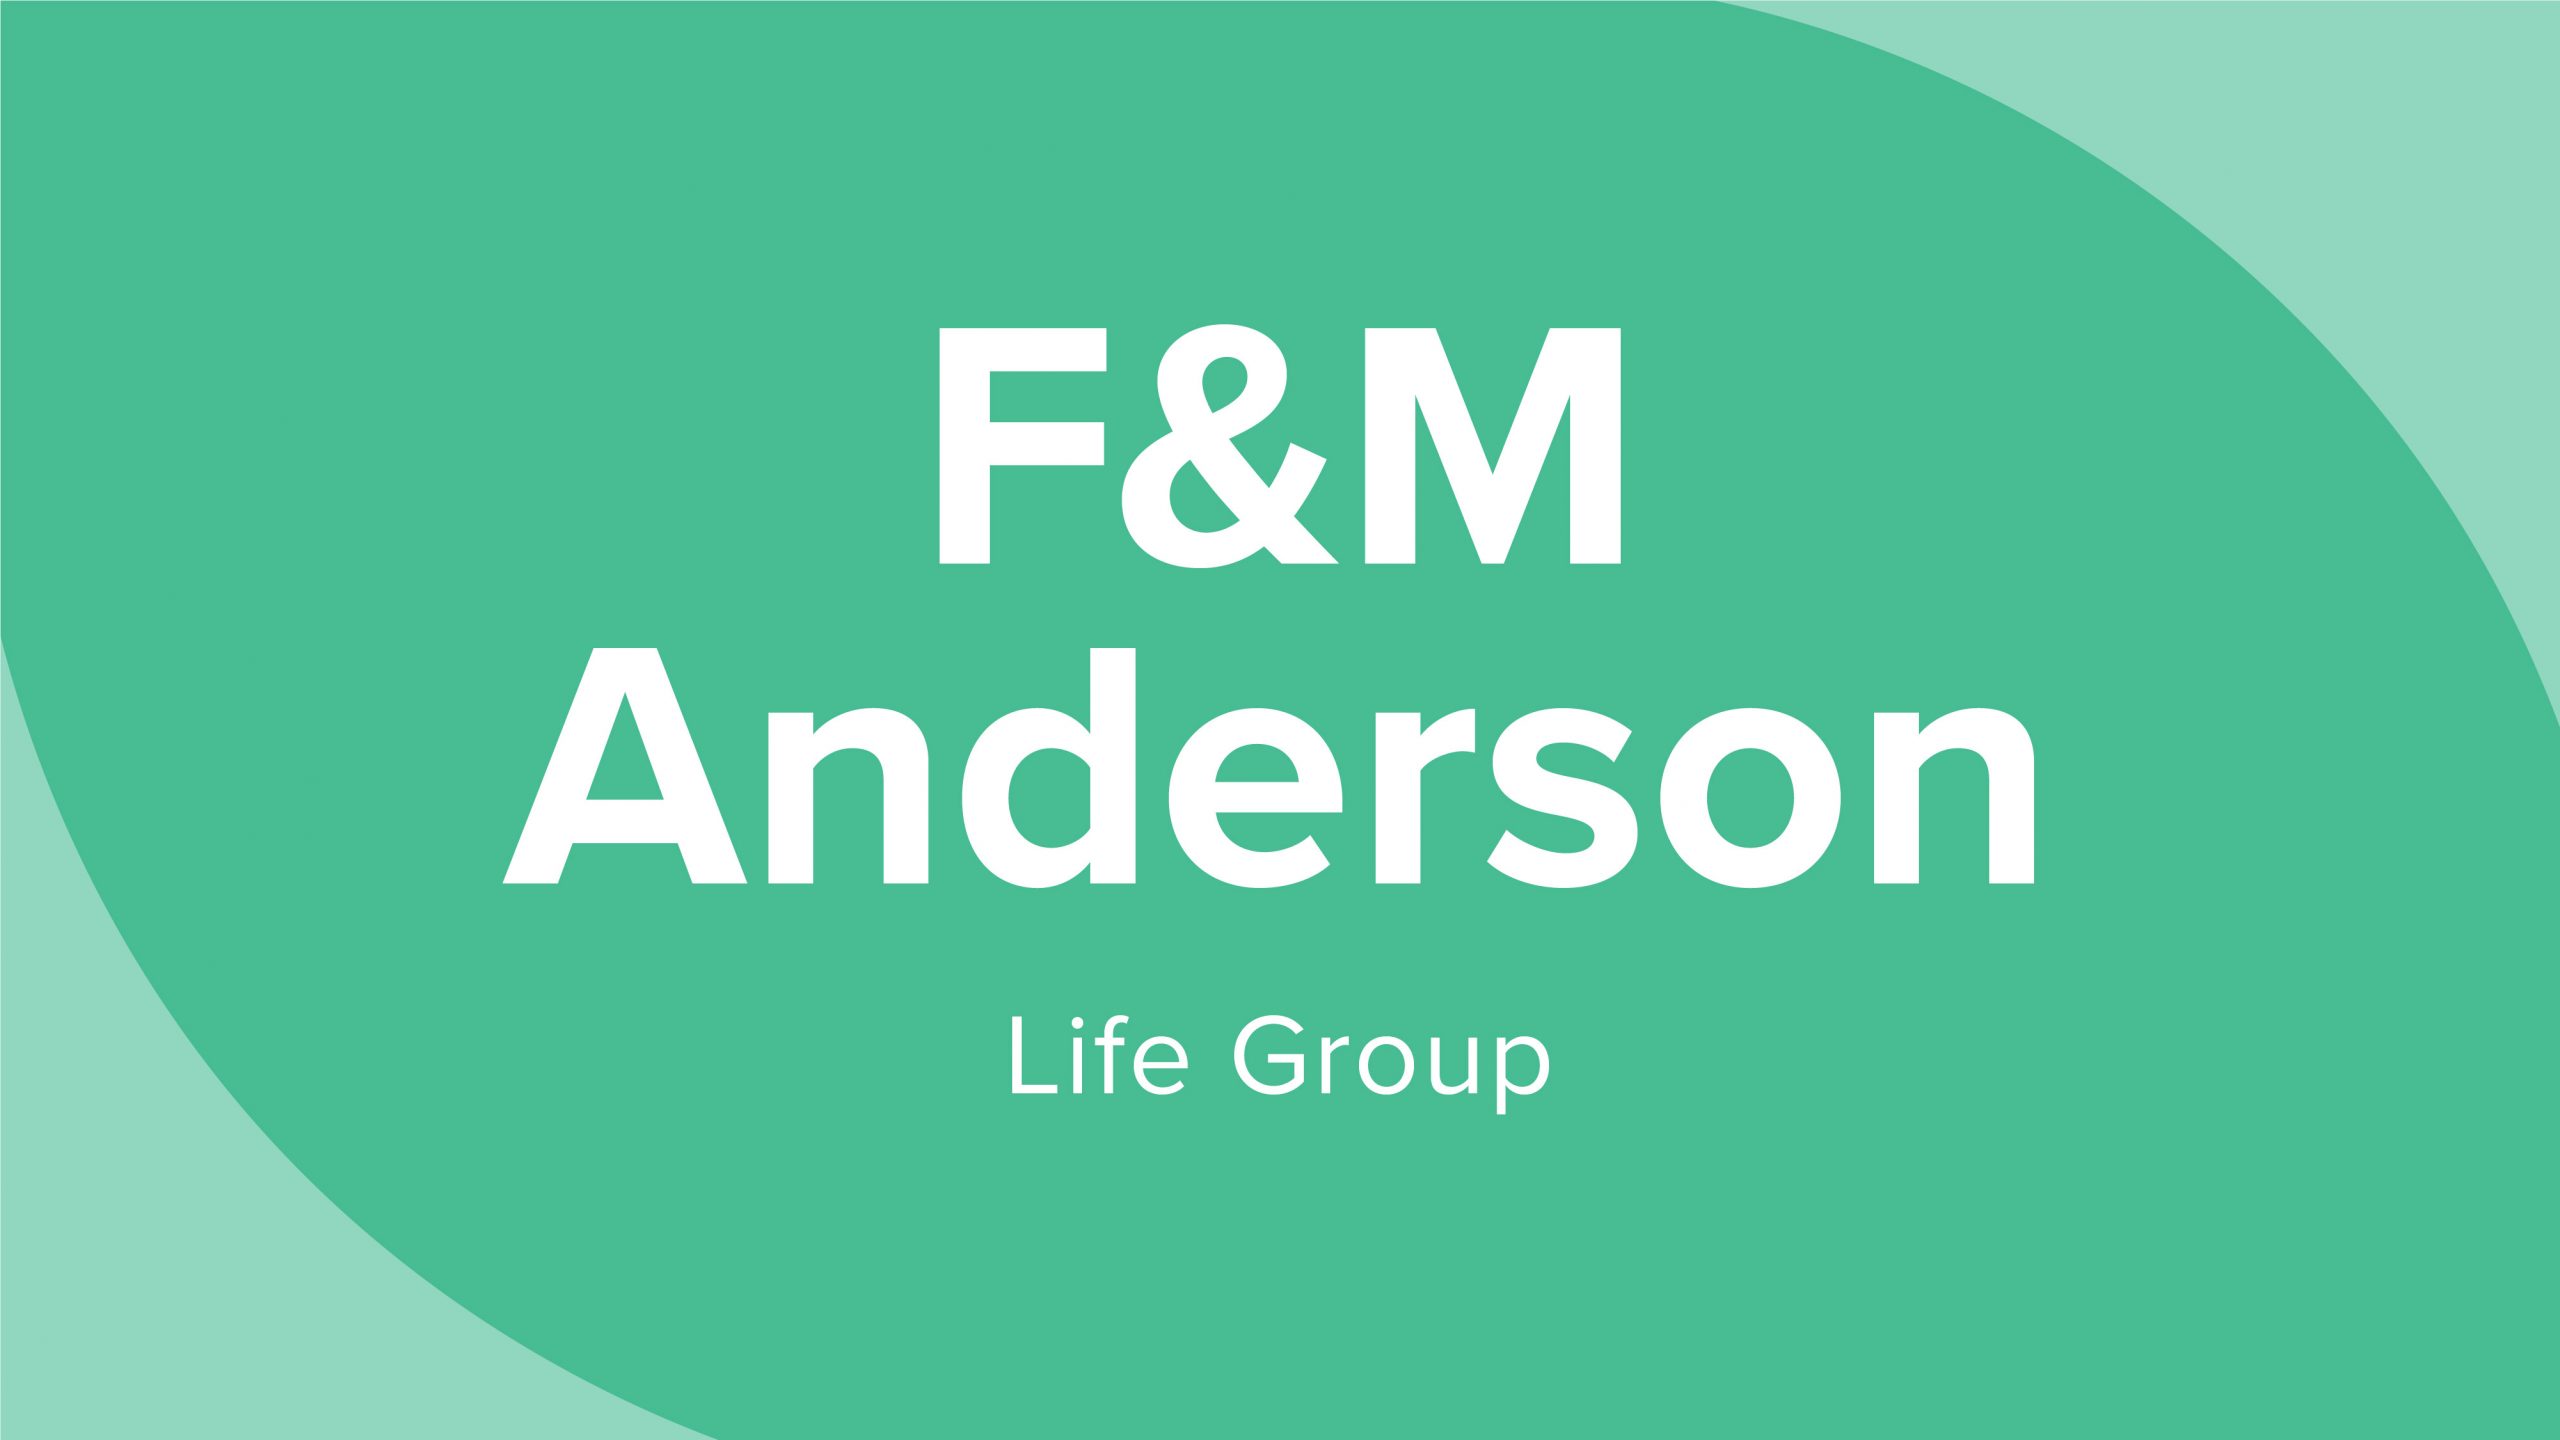 F&M Anderson Life Group